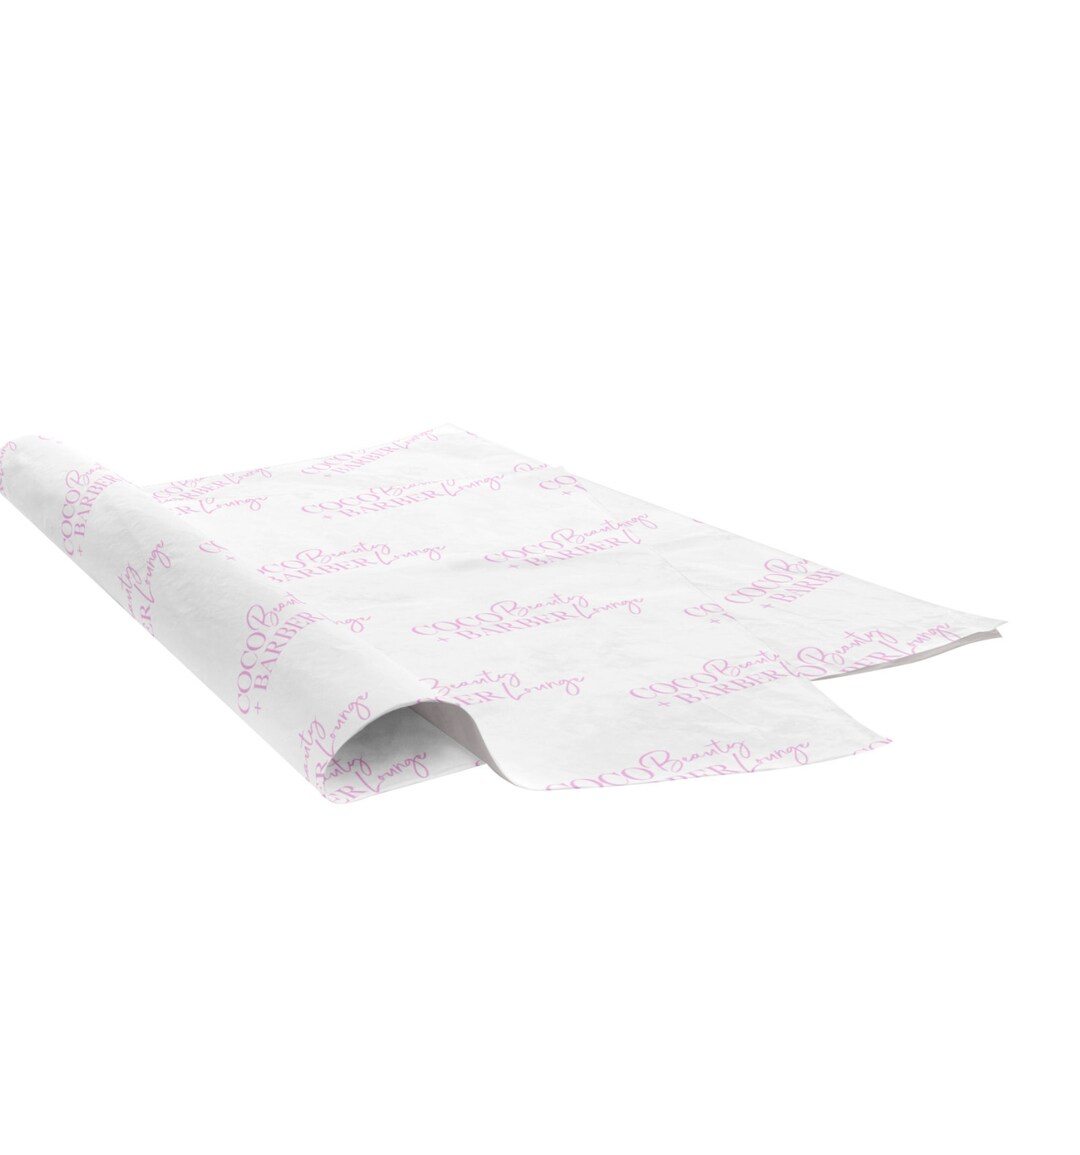 Custom Tissue Paper Sheets 20x30 Inches Exclusive HOH Design Packaging  Supplies 